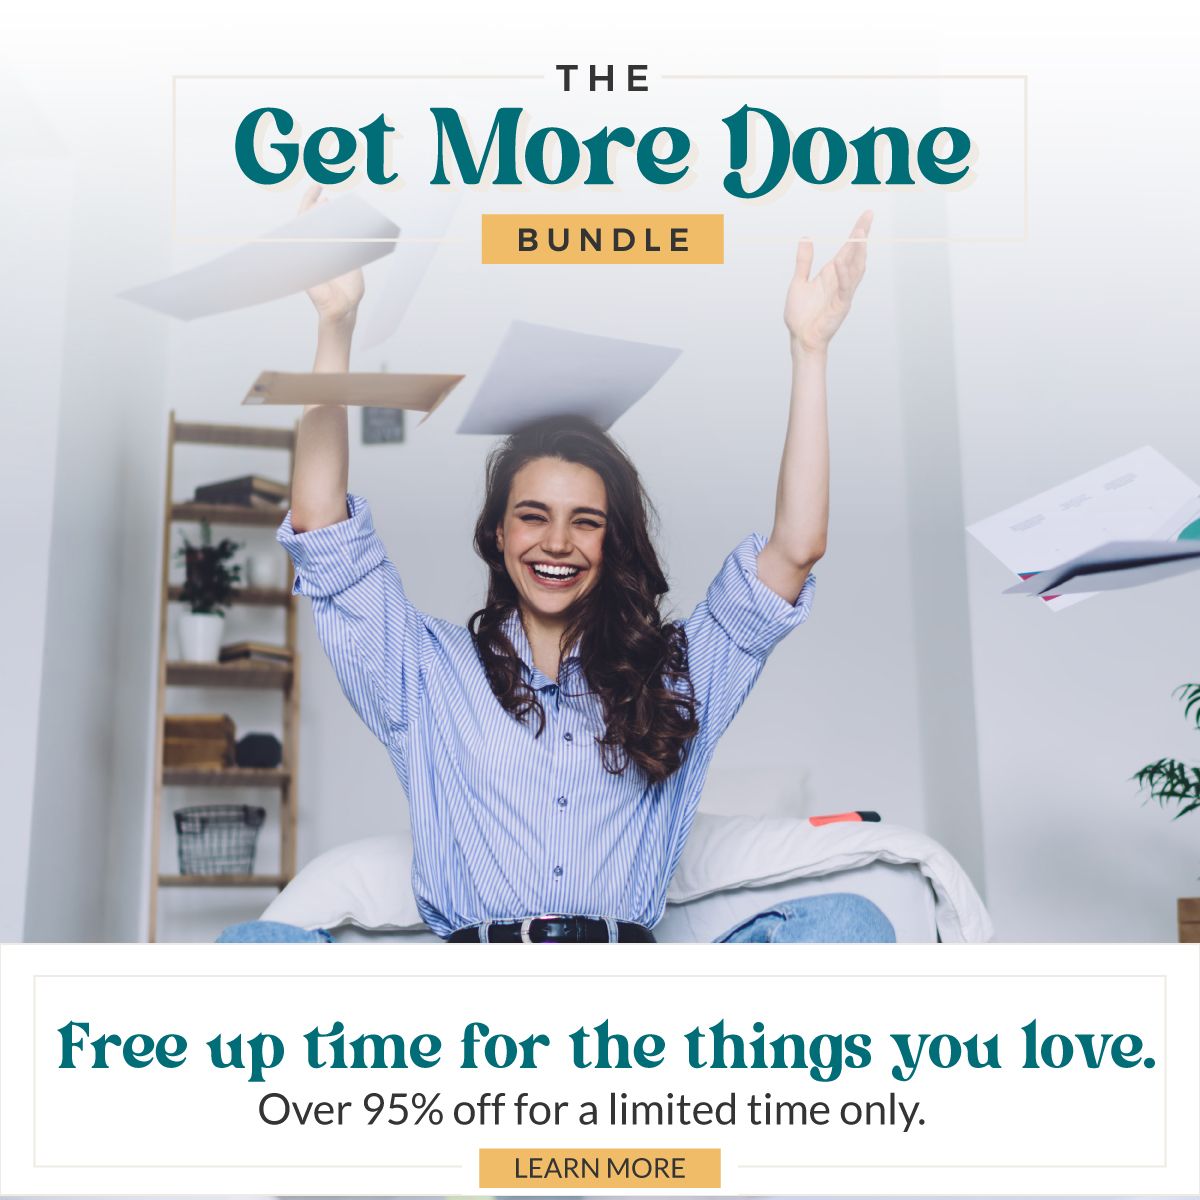 Free up time for the things you love with the Get More Done Bundle